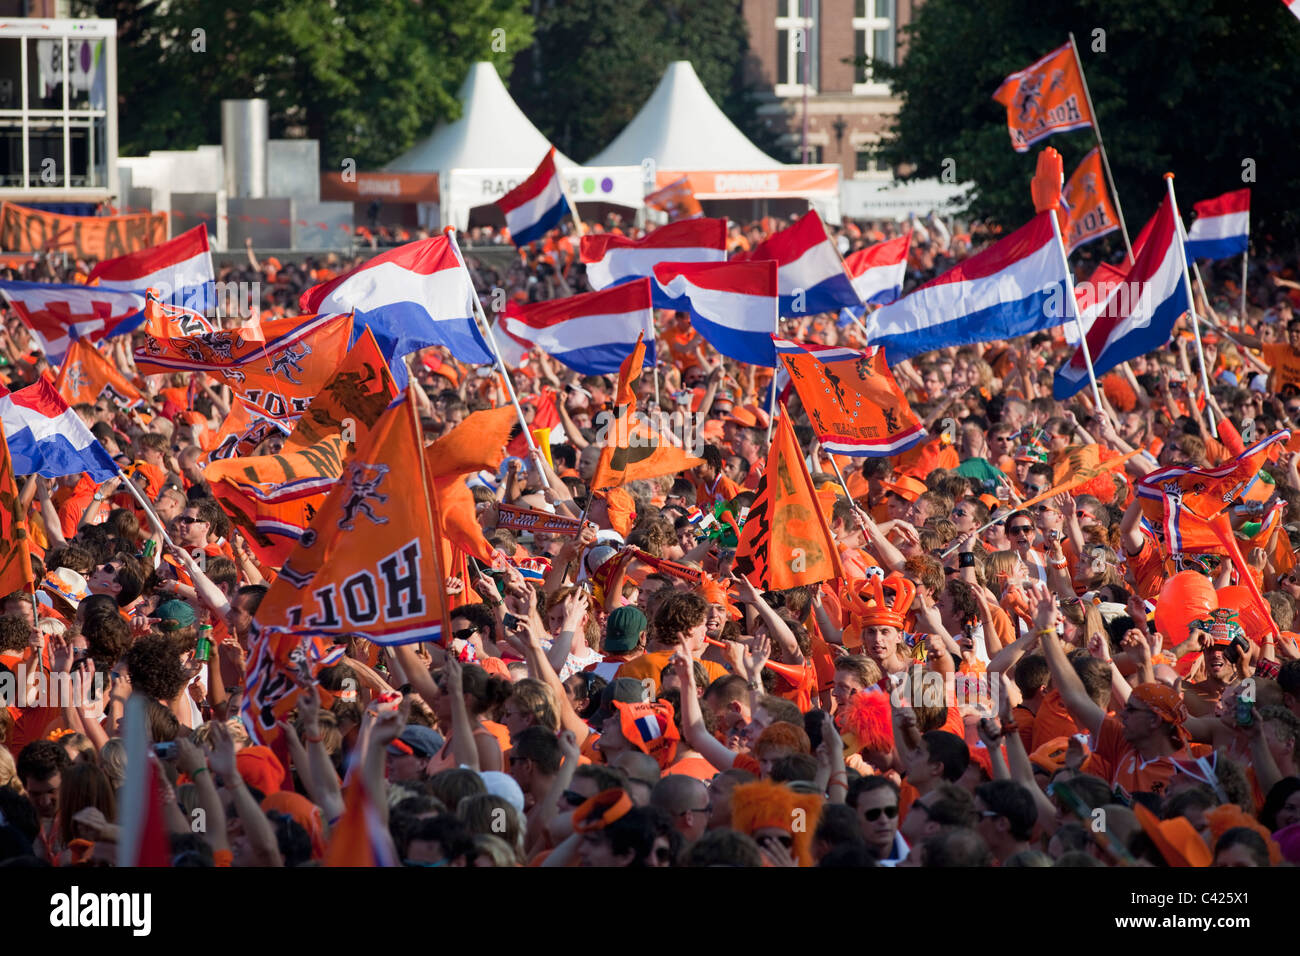 6 July. Final Netherlands - Spain. 180.000 supporters gathering together, mainly dressed in national color orange. Stock Photo